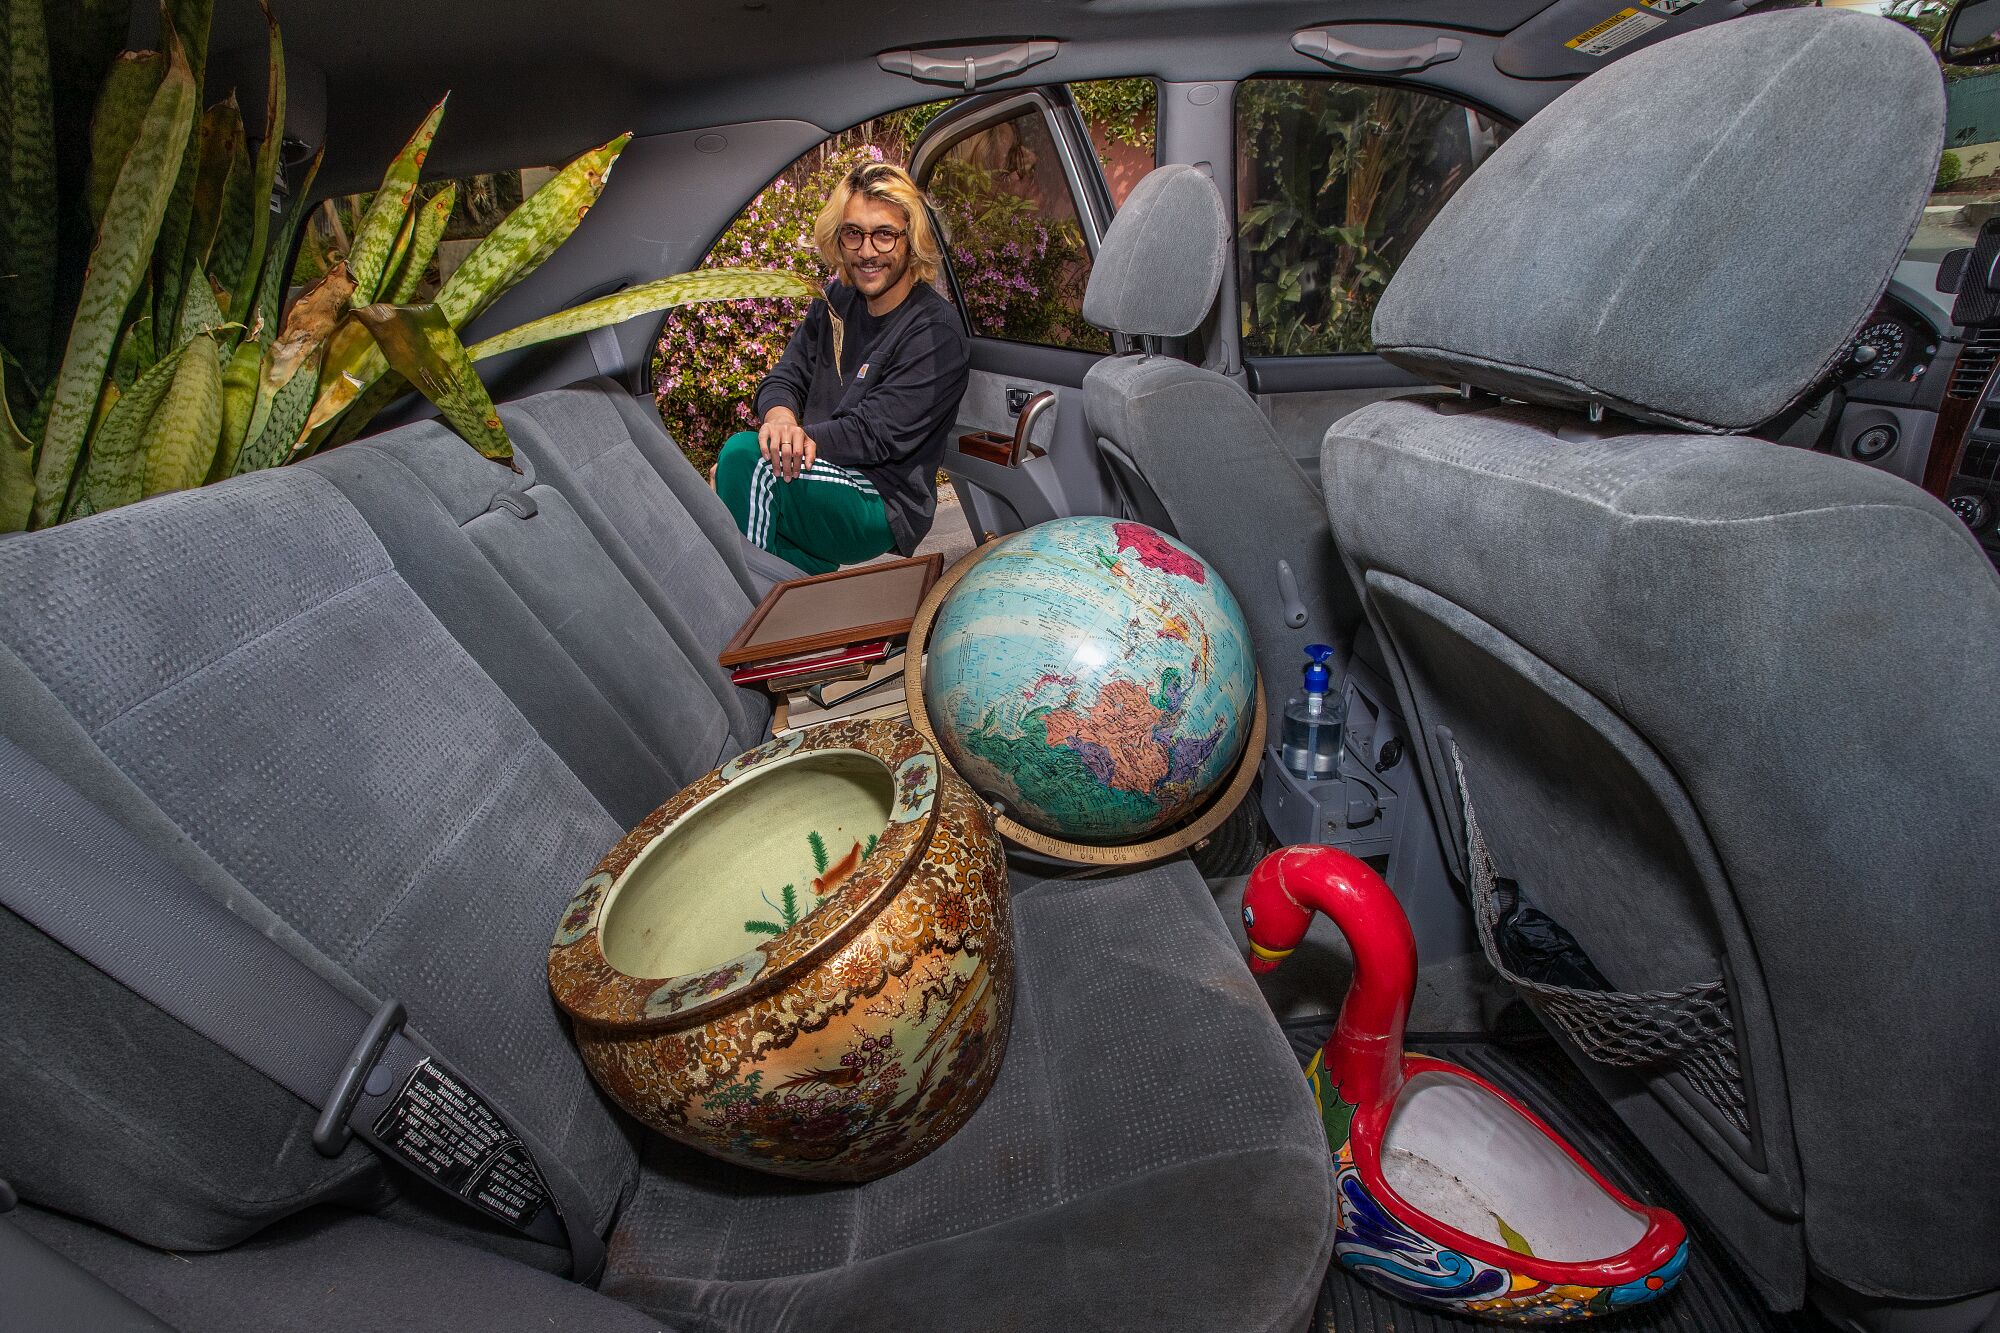 Max Bennett Kelly, 26, of Hollywood, loads the back seat of his car with items he purchased.